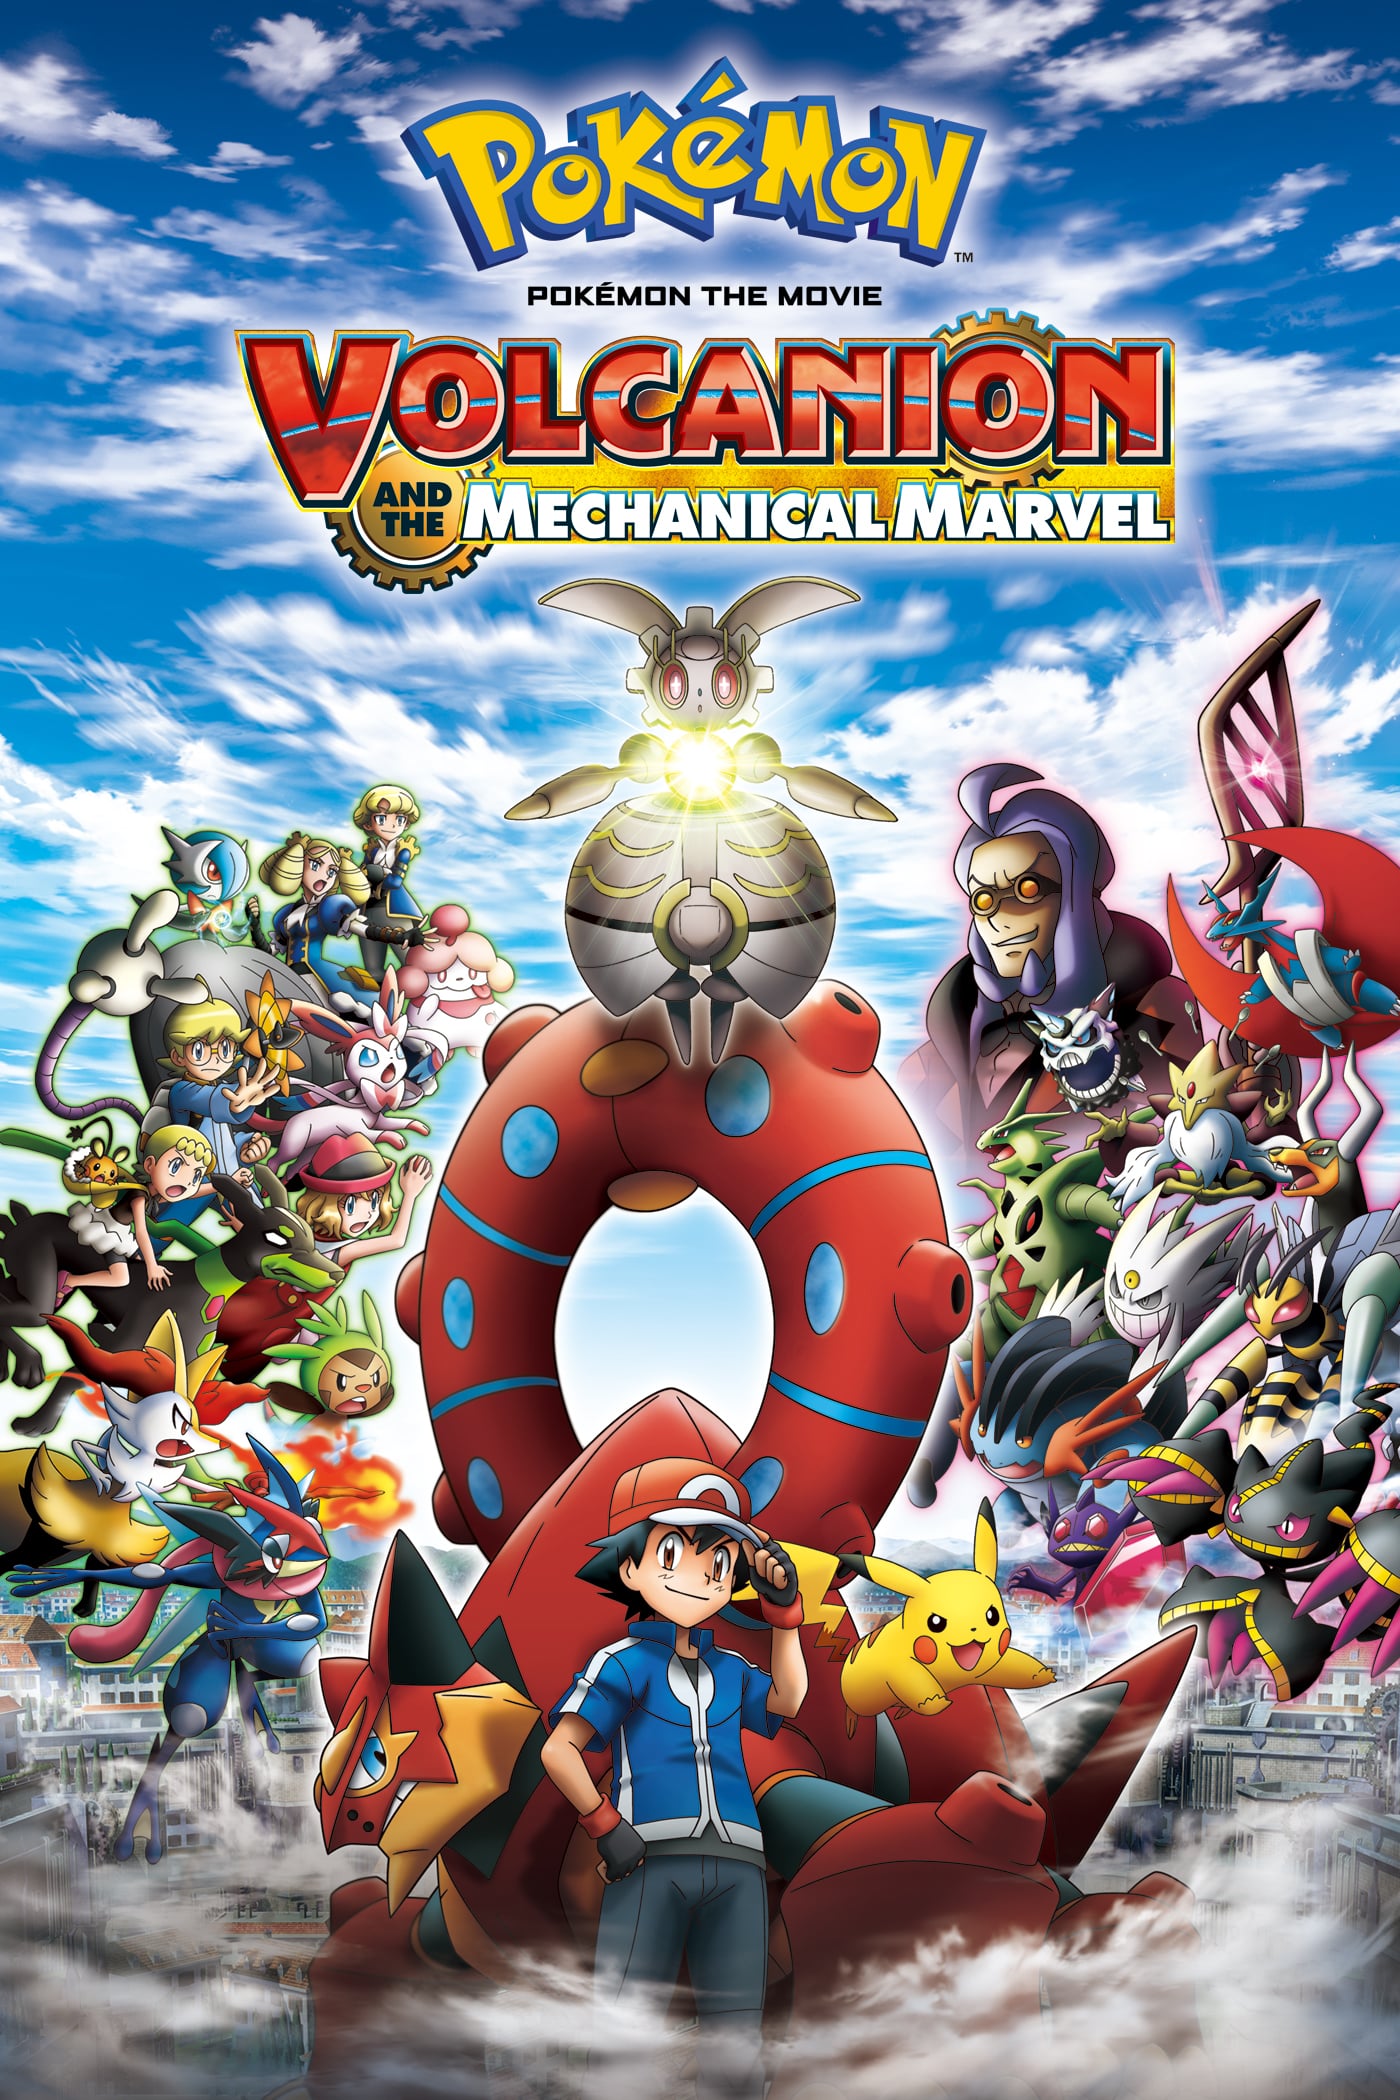 Movie: Volcanion and the Mechanical Marvel